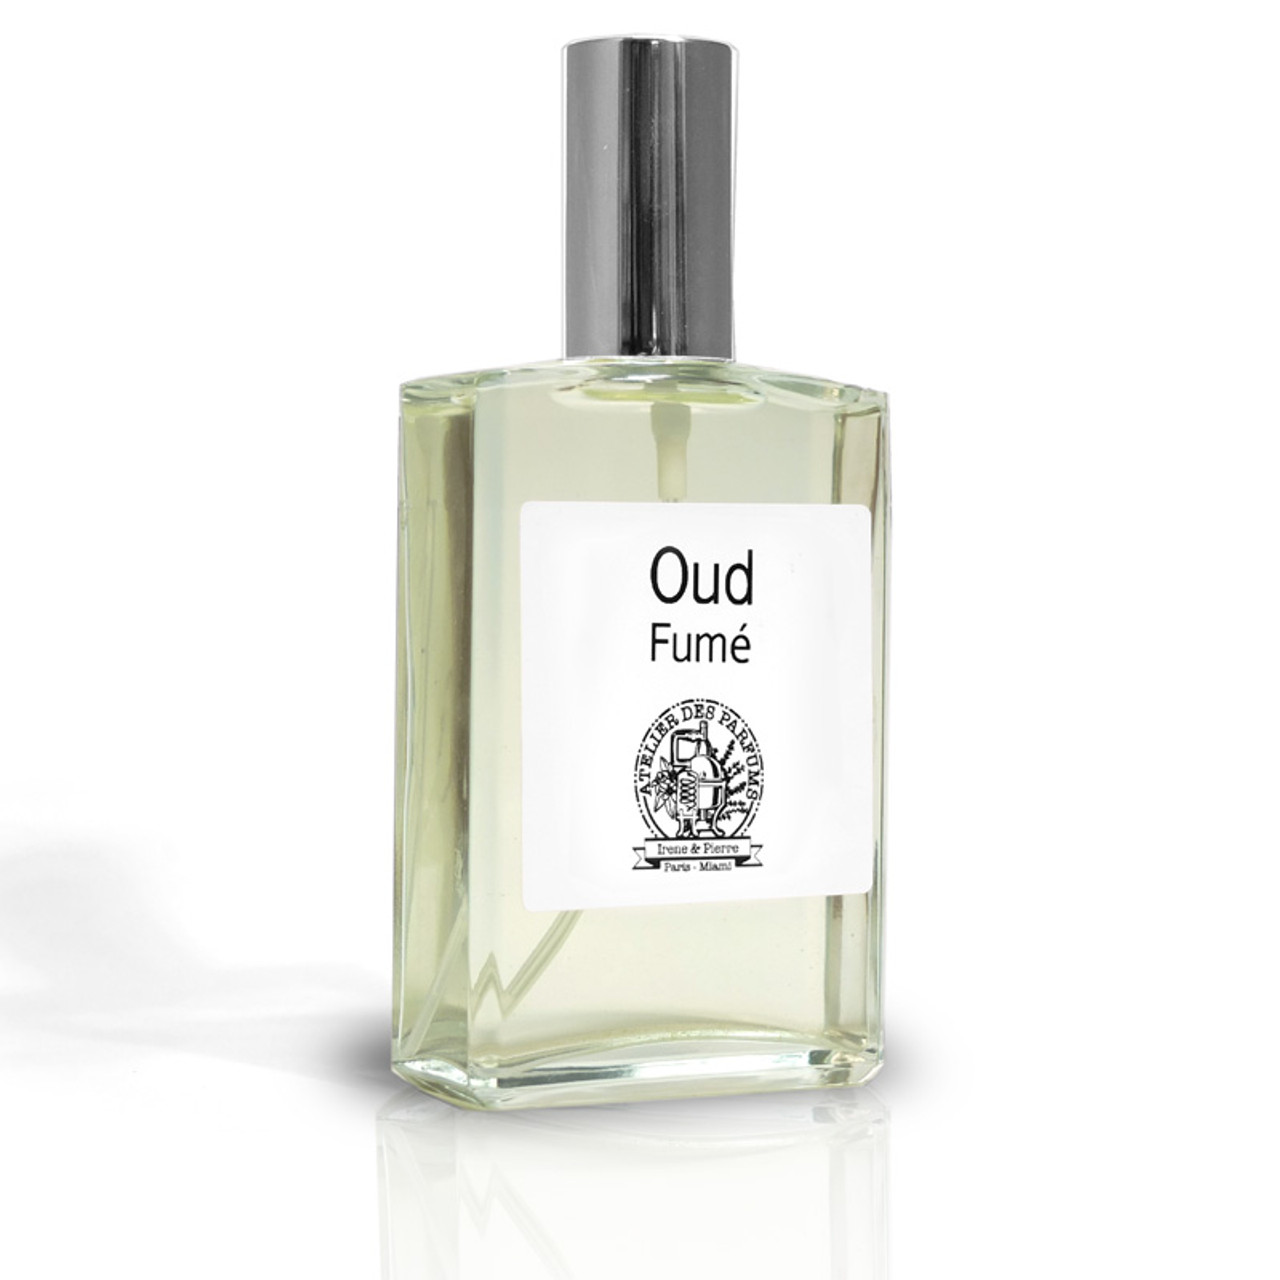 Oud Fumee eau de parfum made with essential oils - Therapia By Aroma